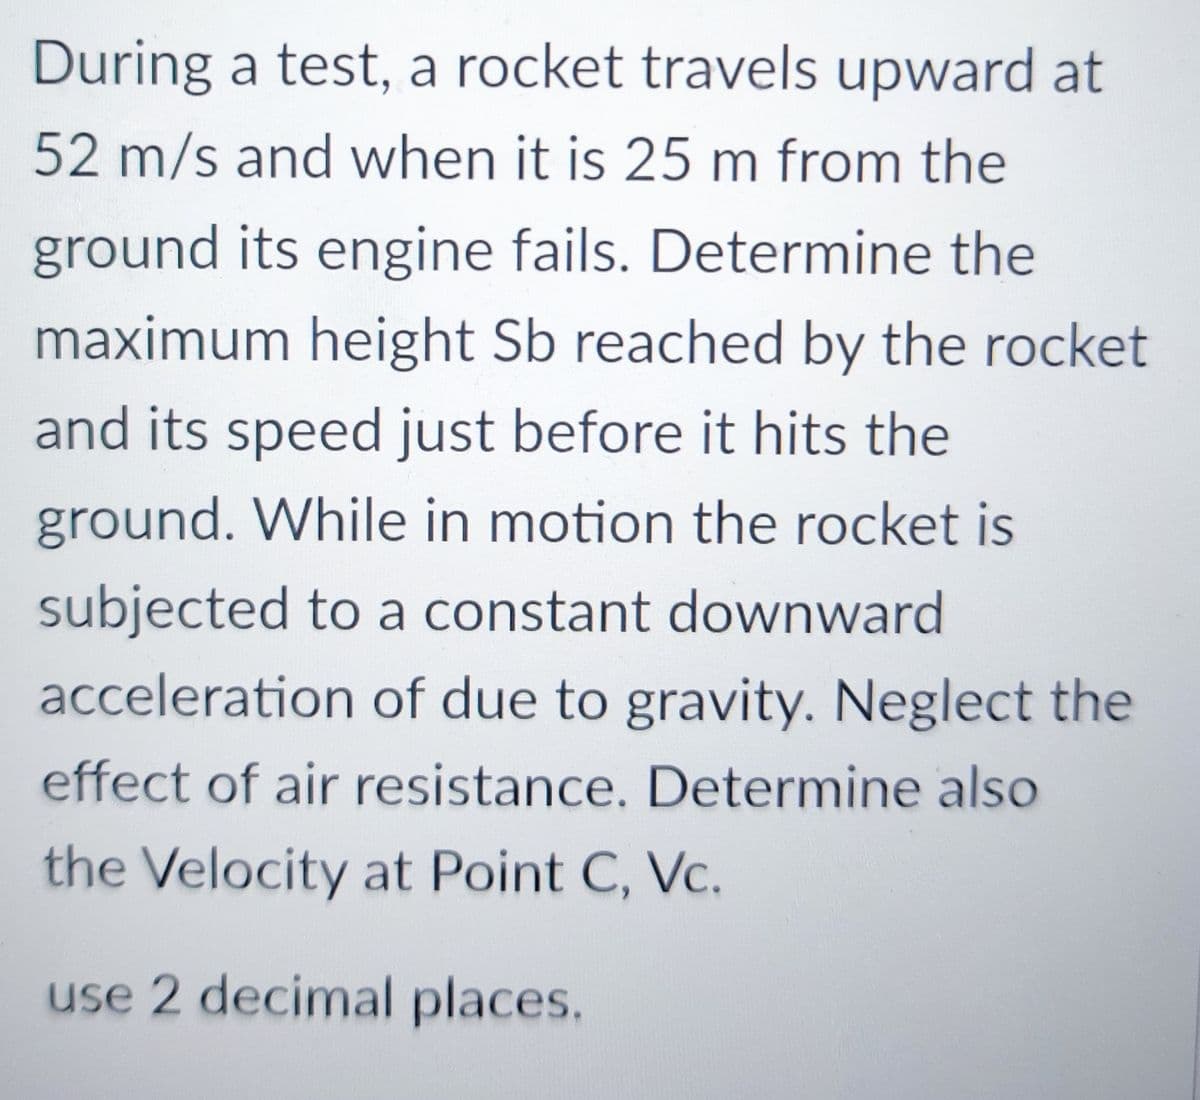 During a test, a rocket travels upward at
52 m/s and when it is 25 m from the
ground its engine fails. Determine the
maximum height Sb reached by the rocket
and its speed just before it hits the
ground. While in motion the rocket is
subjected to a constant downward
acceleration of due to gravity. Neglect the
effect of air resistance. Determine also
the Velocity at Point C, Vc.
use 2 decimal places.
